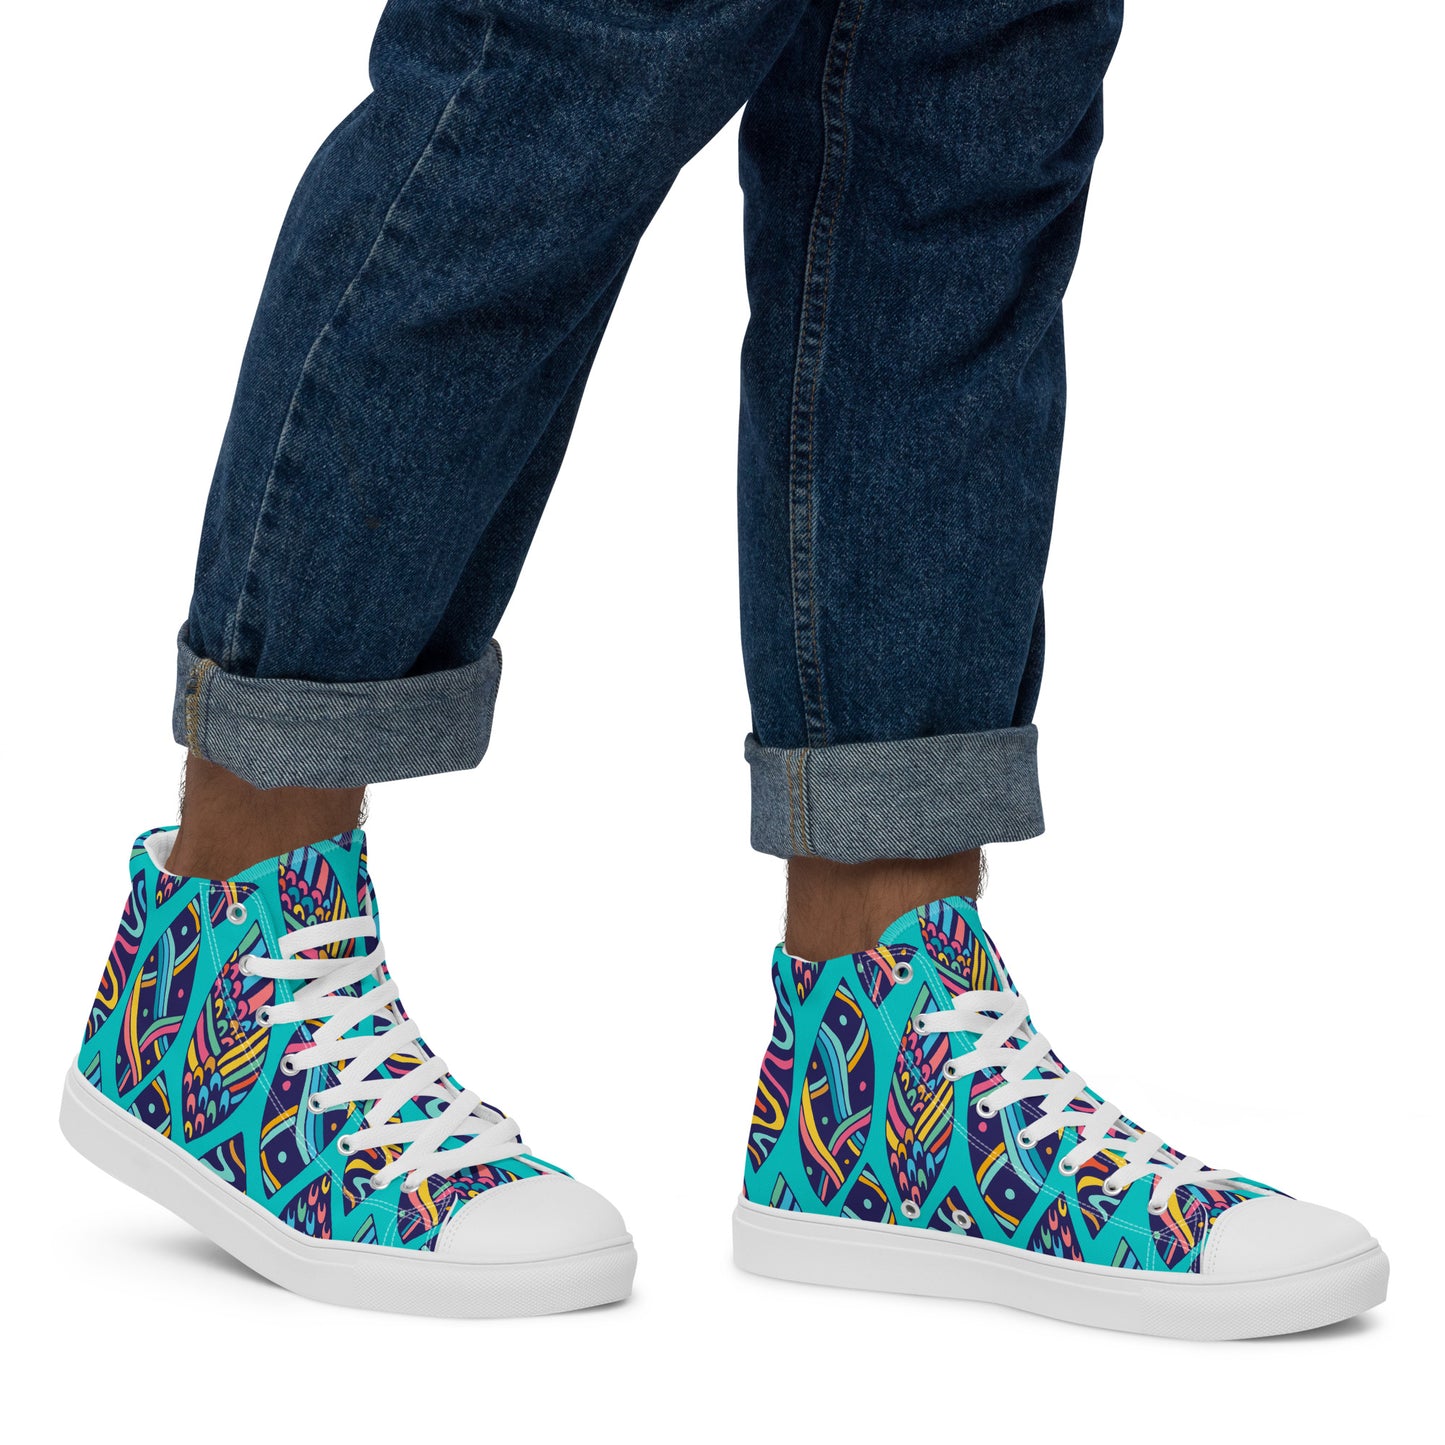 Aloha Surfboards - Men’s high top canvas shoes Mens High Top Shoes Summer Surf